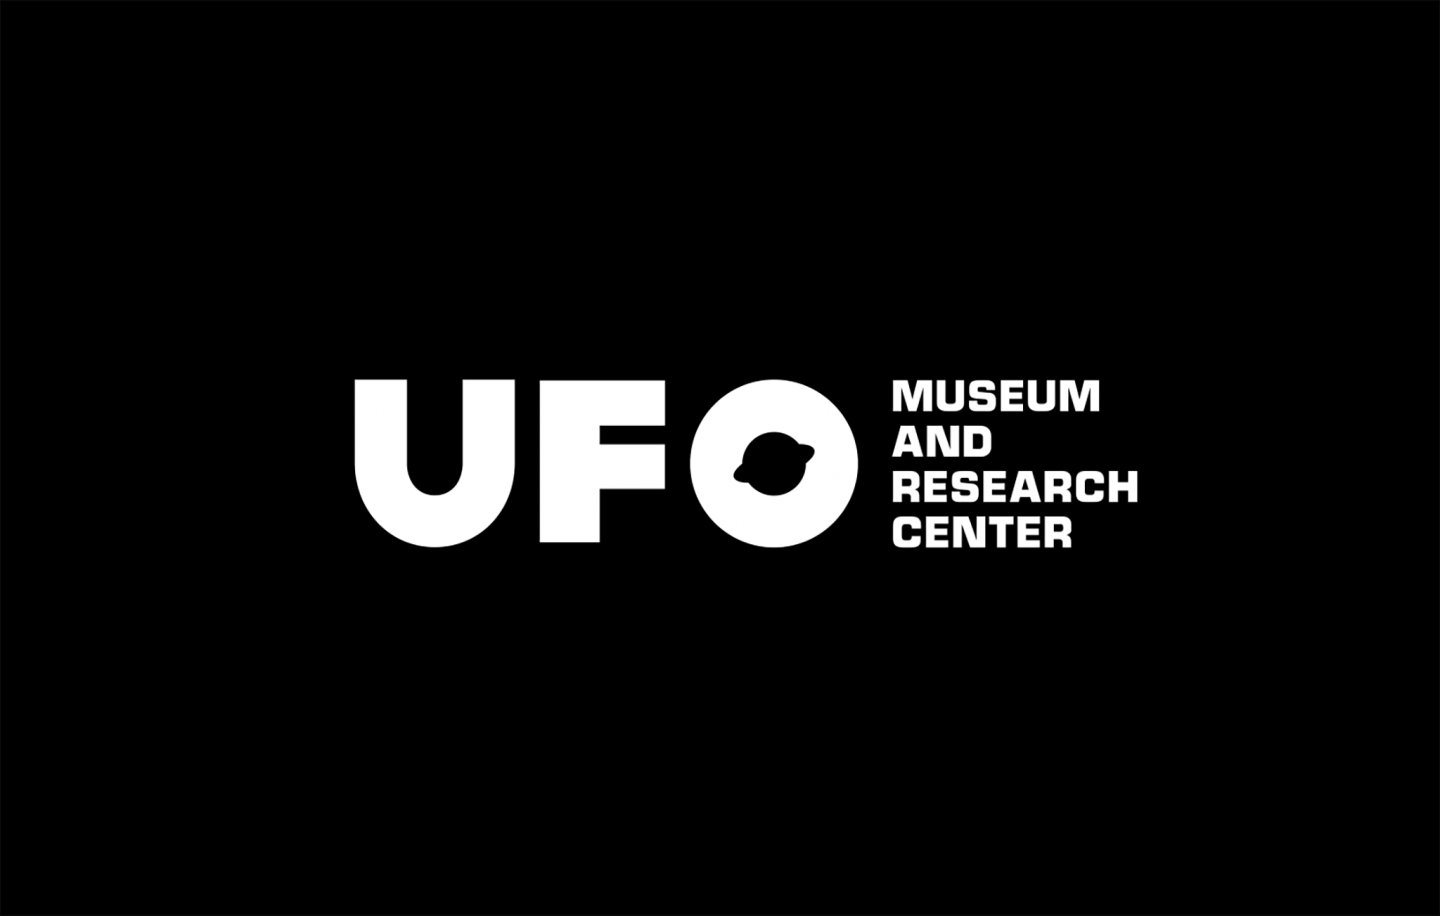 UFO Museum and Research Center Identity